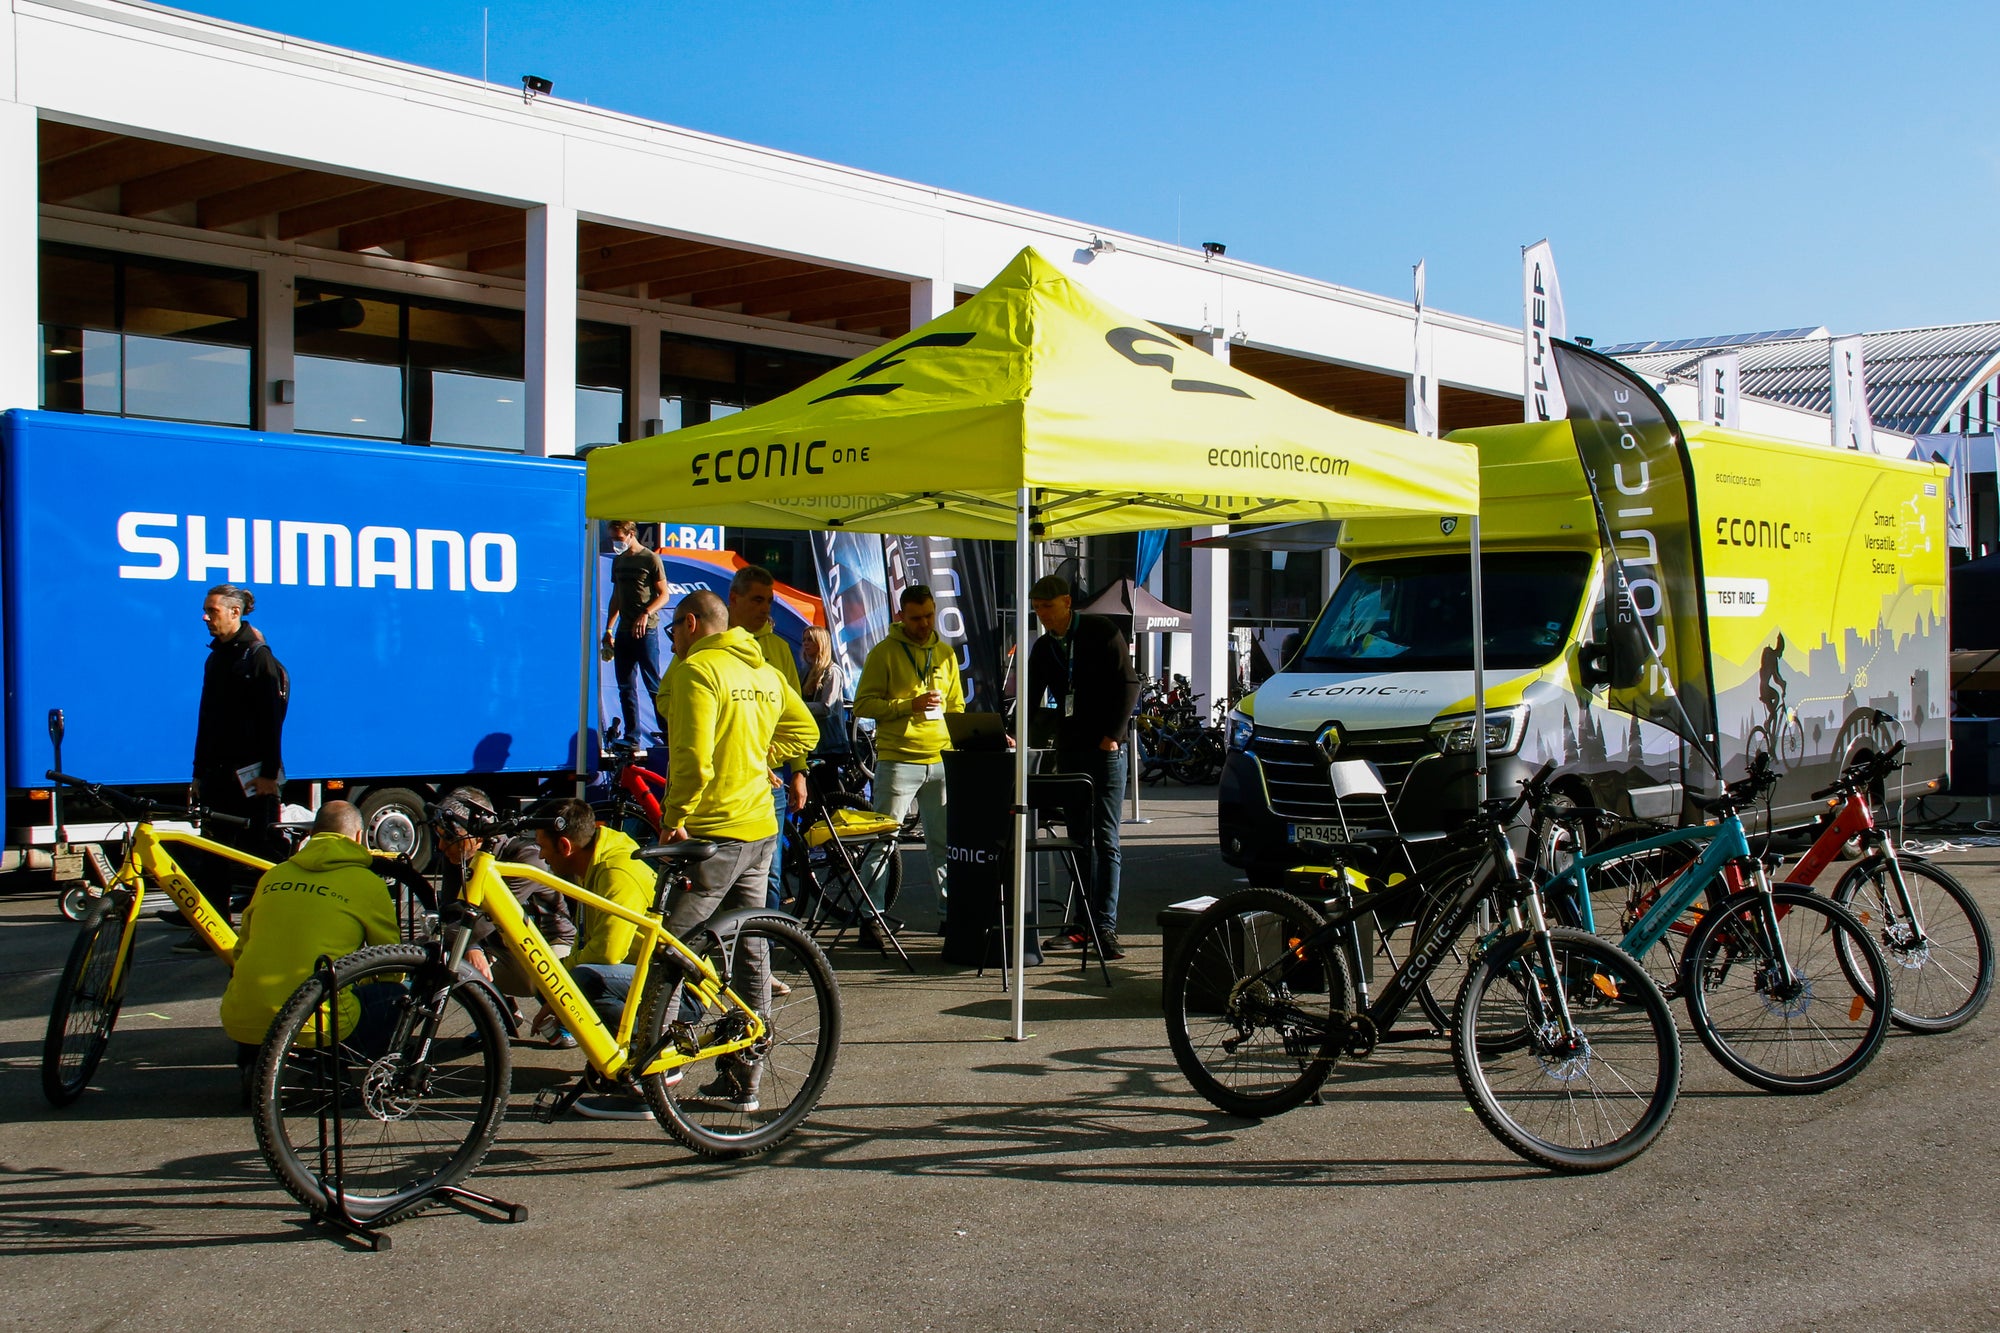 The 29th Eurobike was Econic